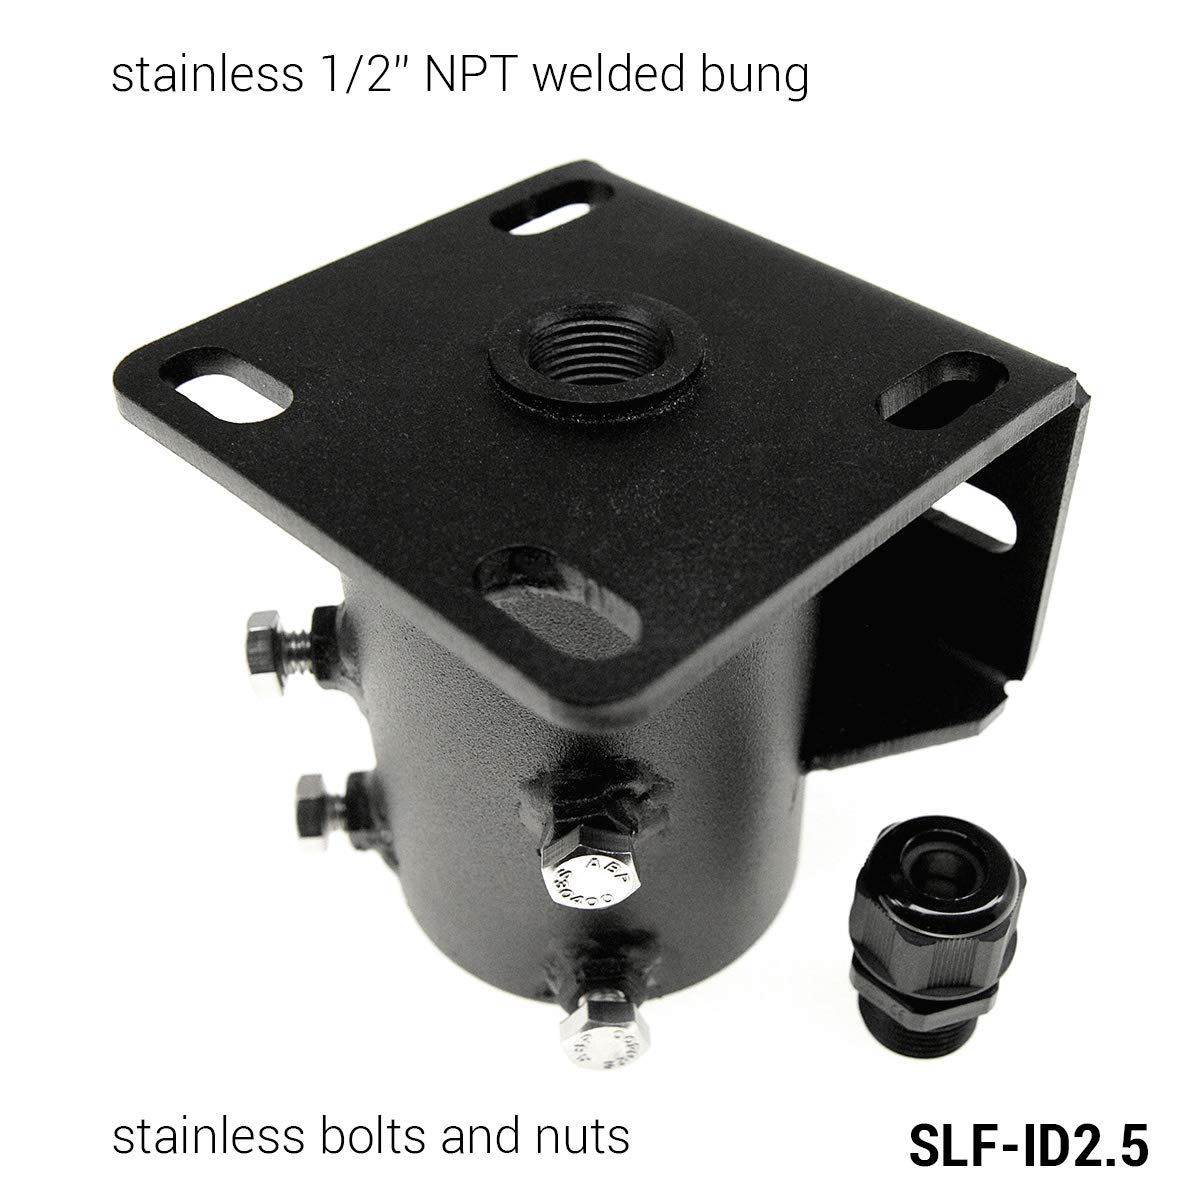 Slipfitter Adaptor Mounting Bracket (ID 2.5") for Round Pole (up to OD 2 3/8")